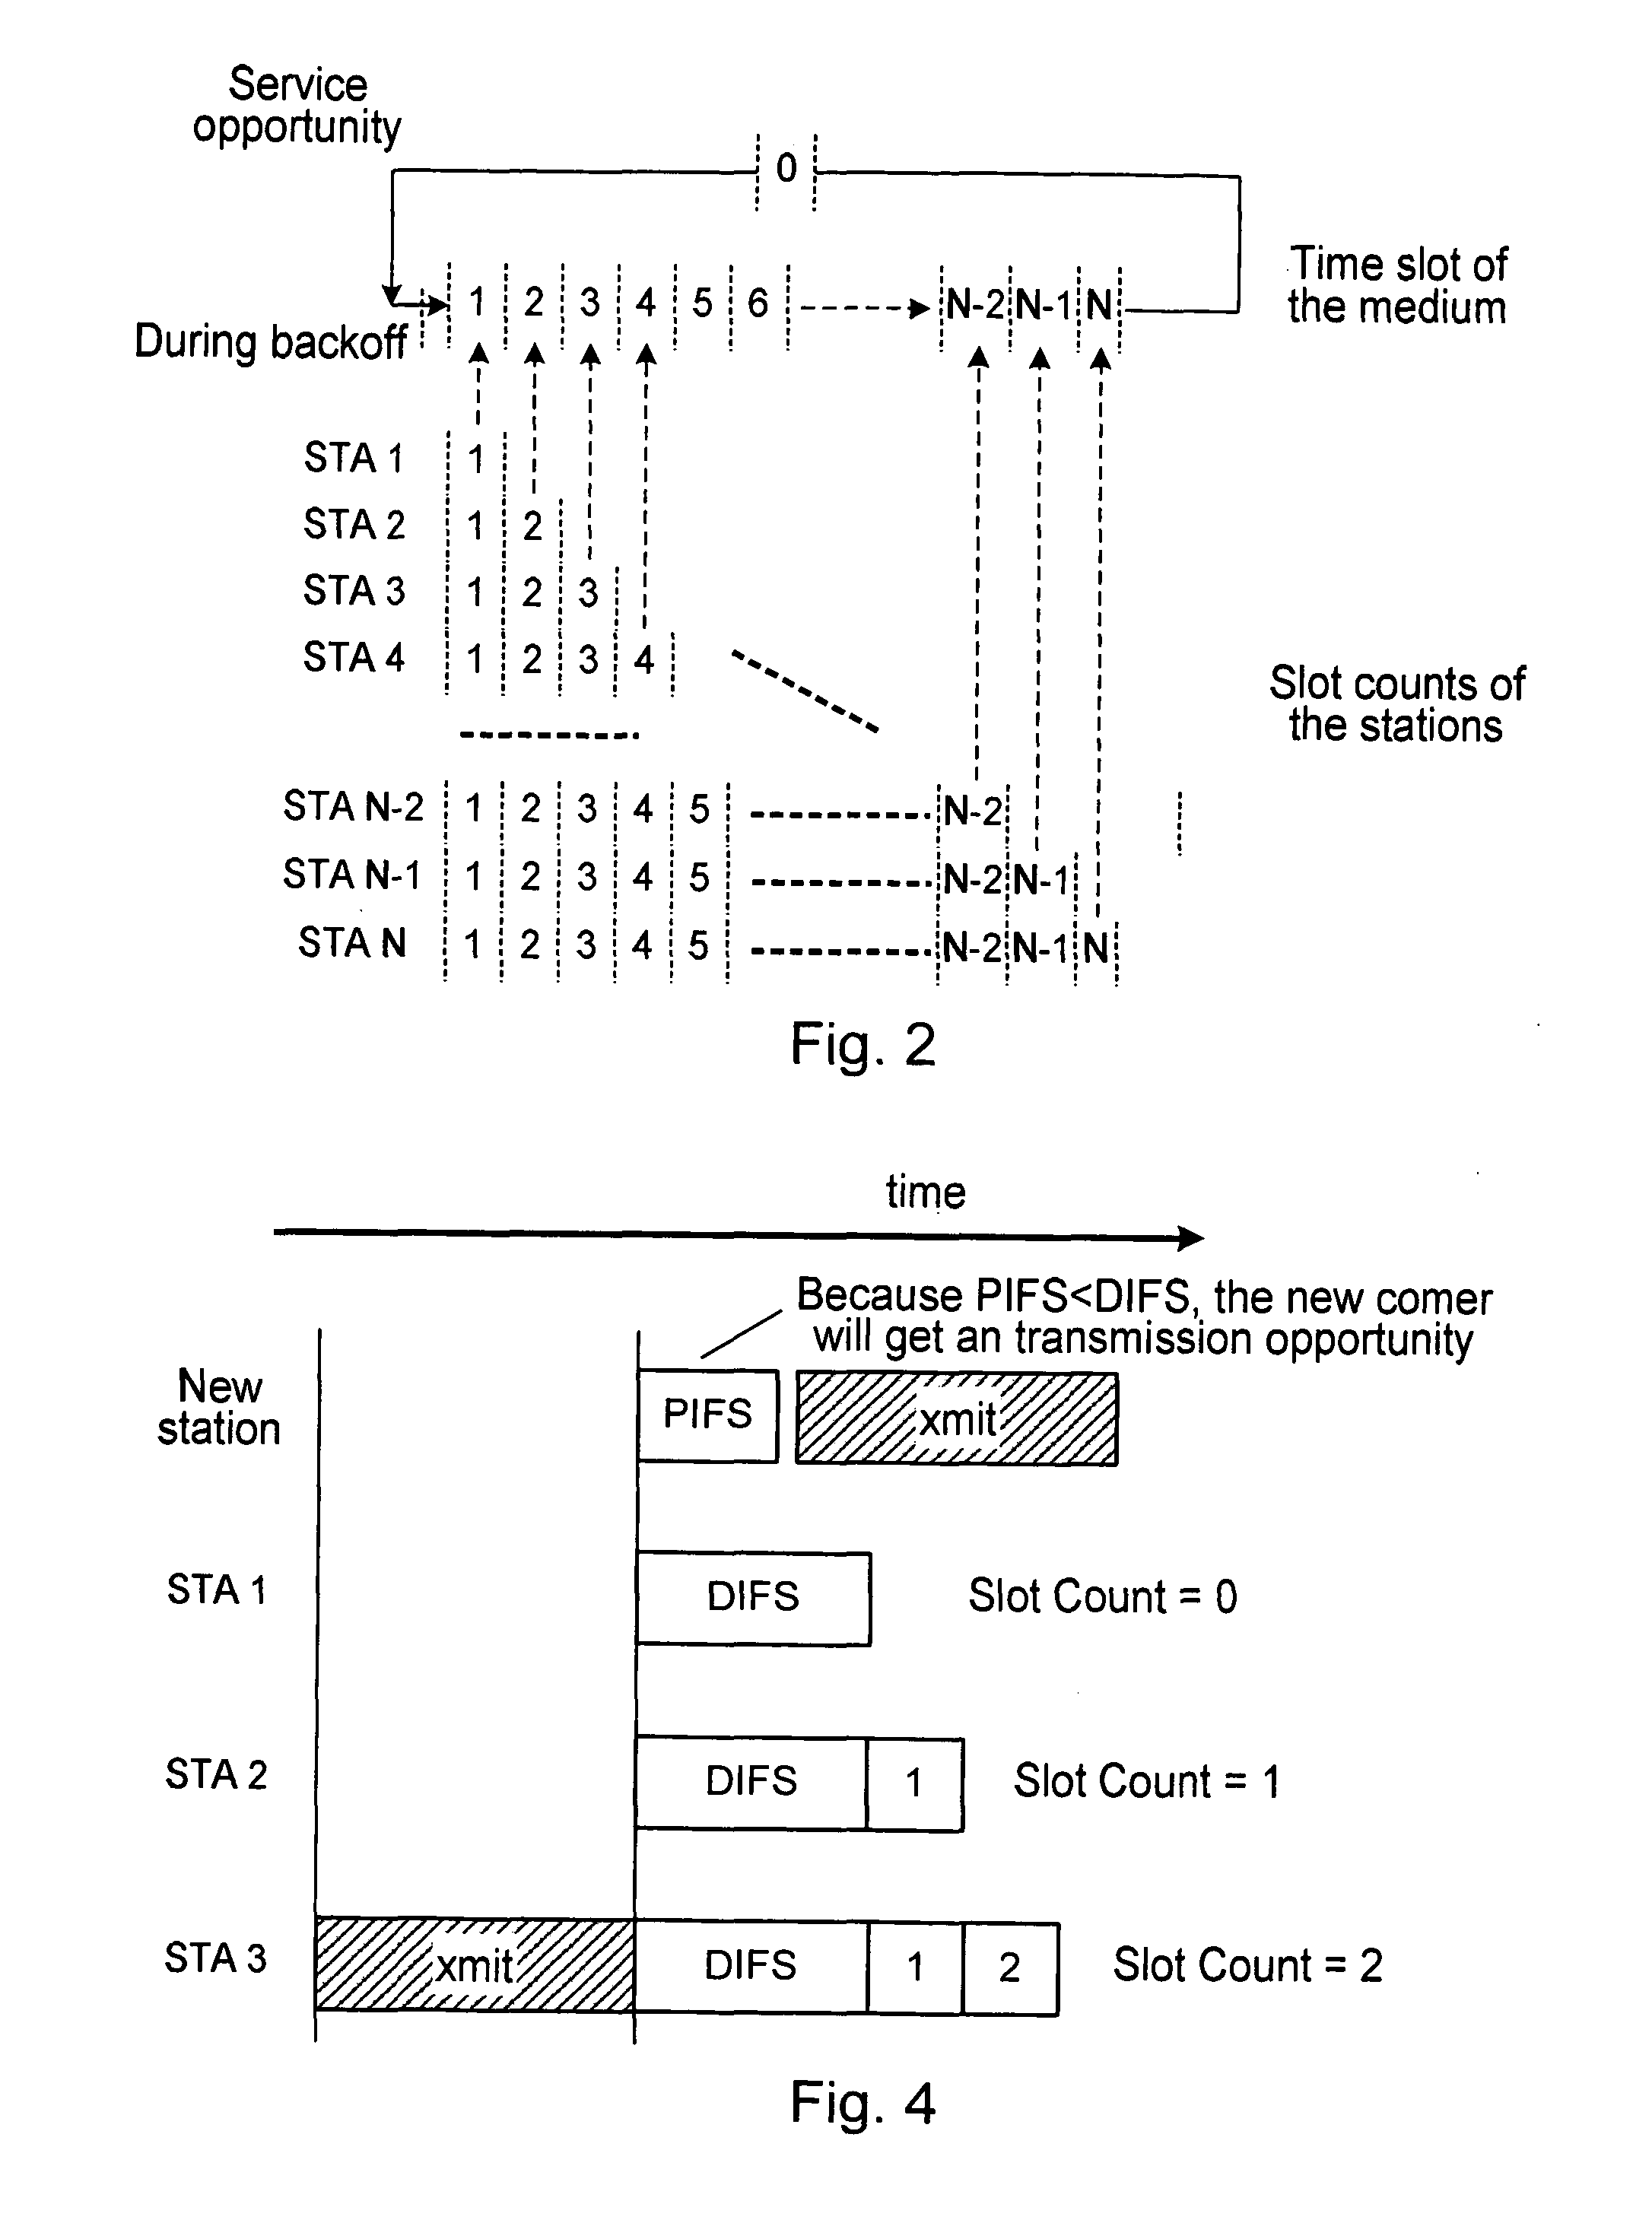 Deterministic back-off method and apparatus for peer-to-peer communications